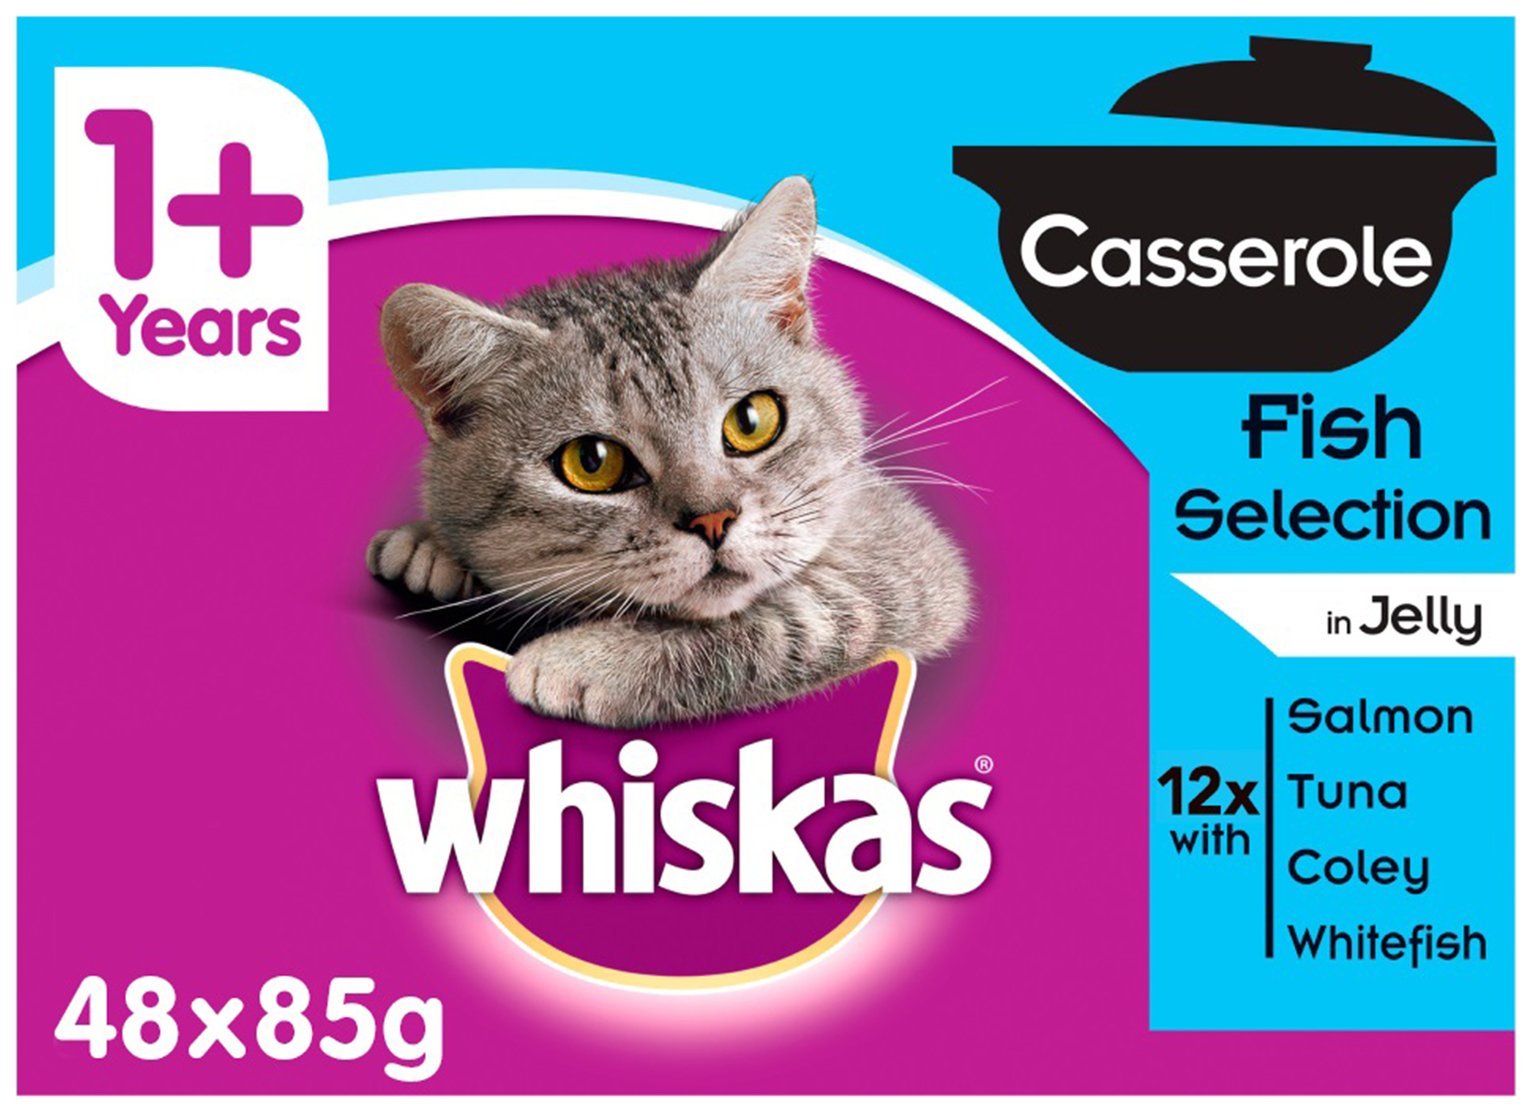 WHISKAS 1+ Cat Pouches Casserole Fish in Jelly - 48x85g